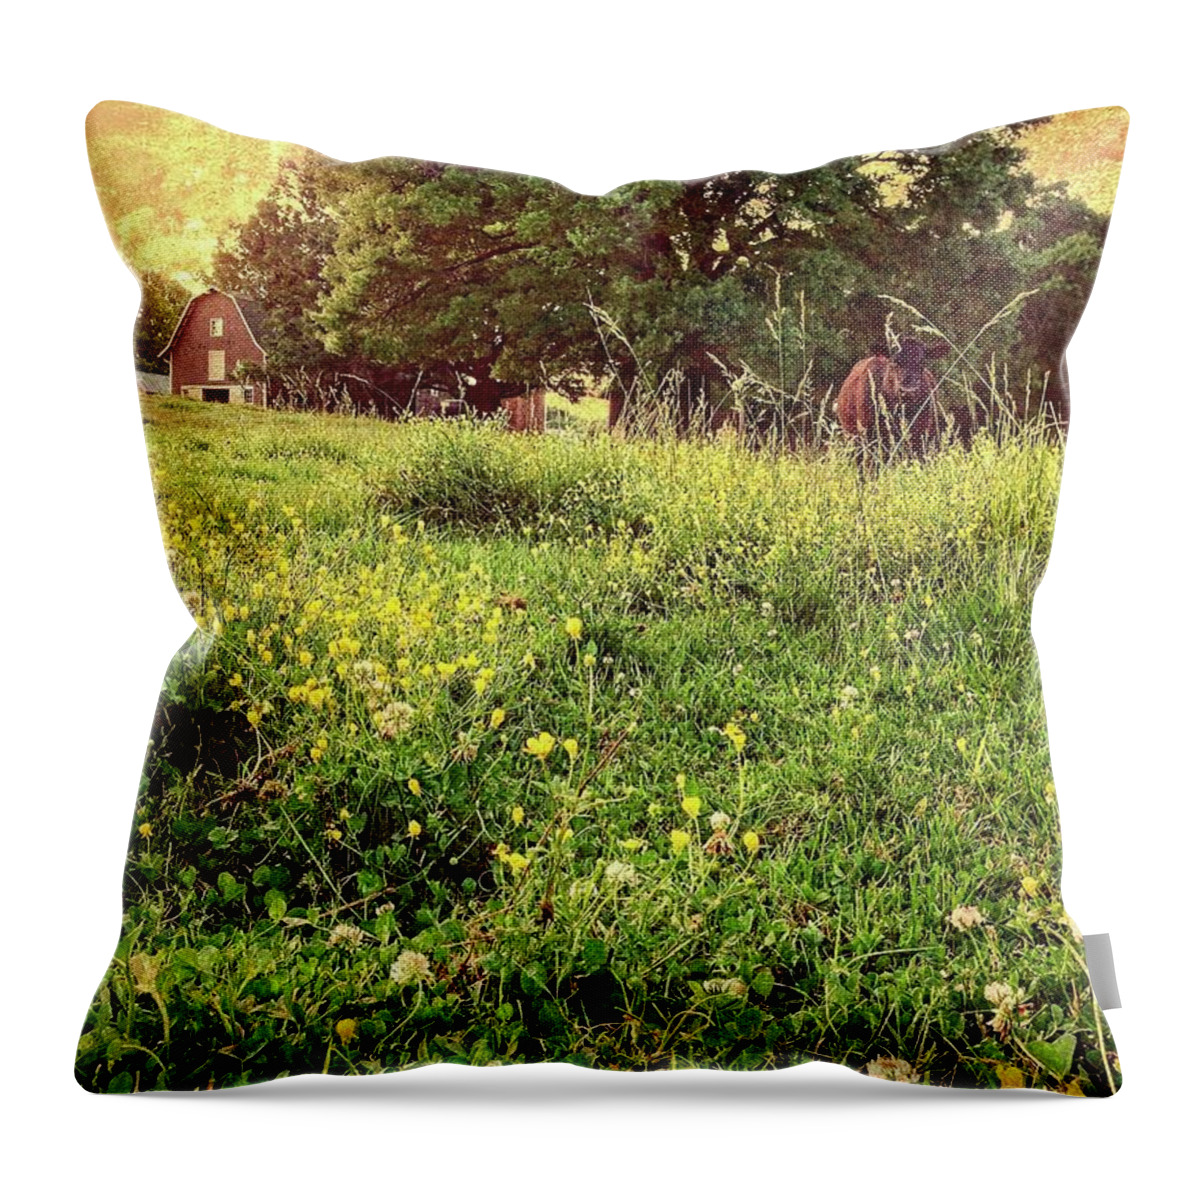 Sun Throw Pillow featuring the photograph Peaceful Pastoral Perspective by Carol Whaley Addassi